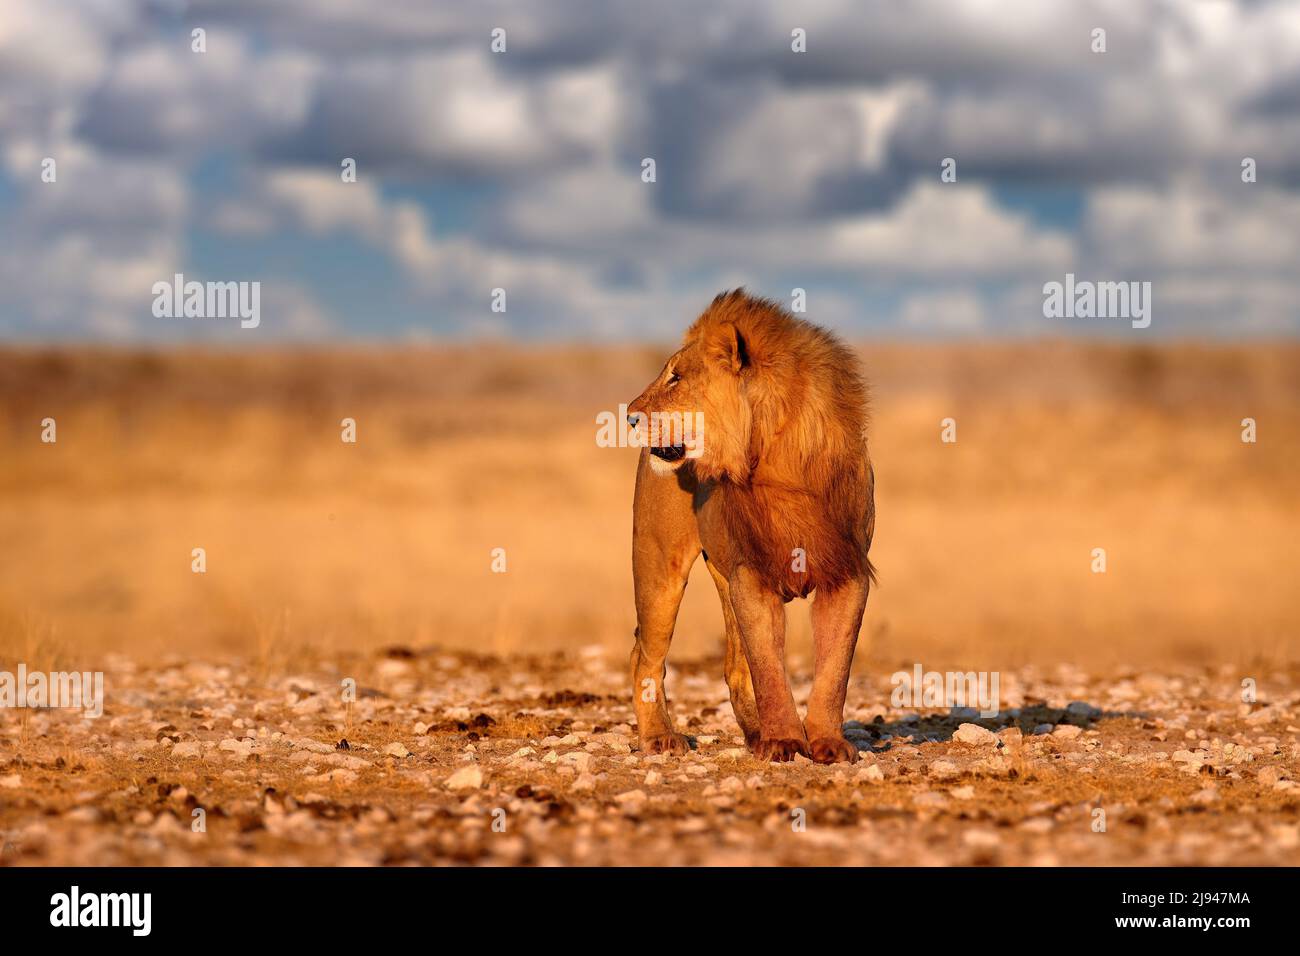 Lion with mane in Etosha, Namibia. African lion walking in the grass, with beautiful evening light. Wildlife scene from nature. Animal in the habitat. Stock Photo